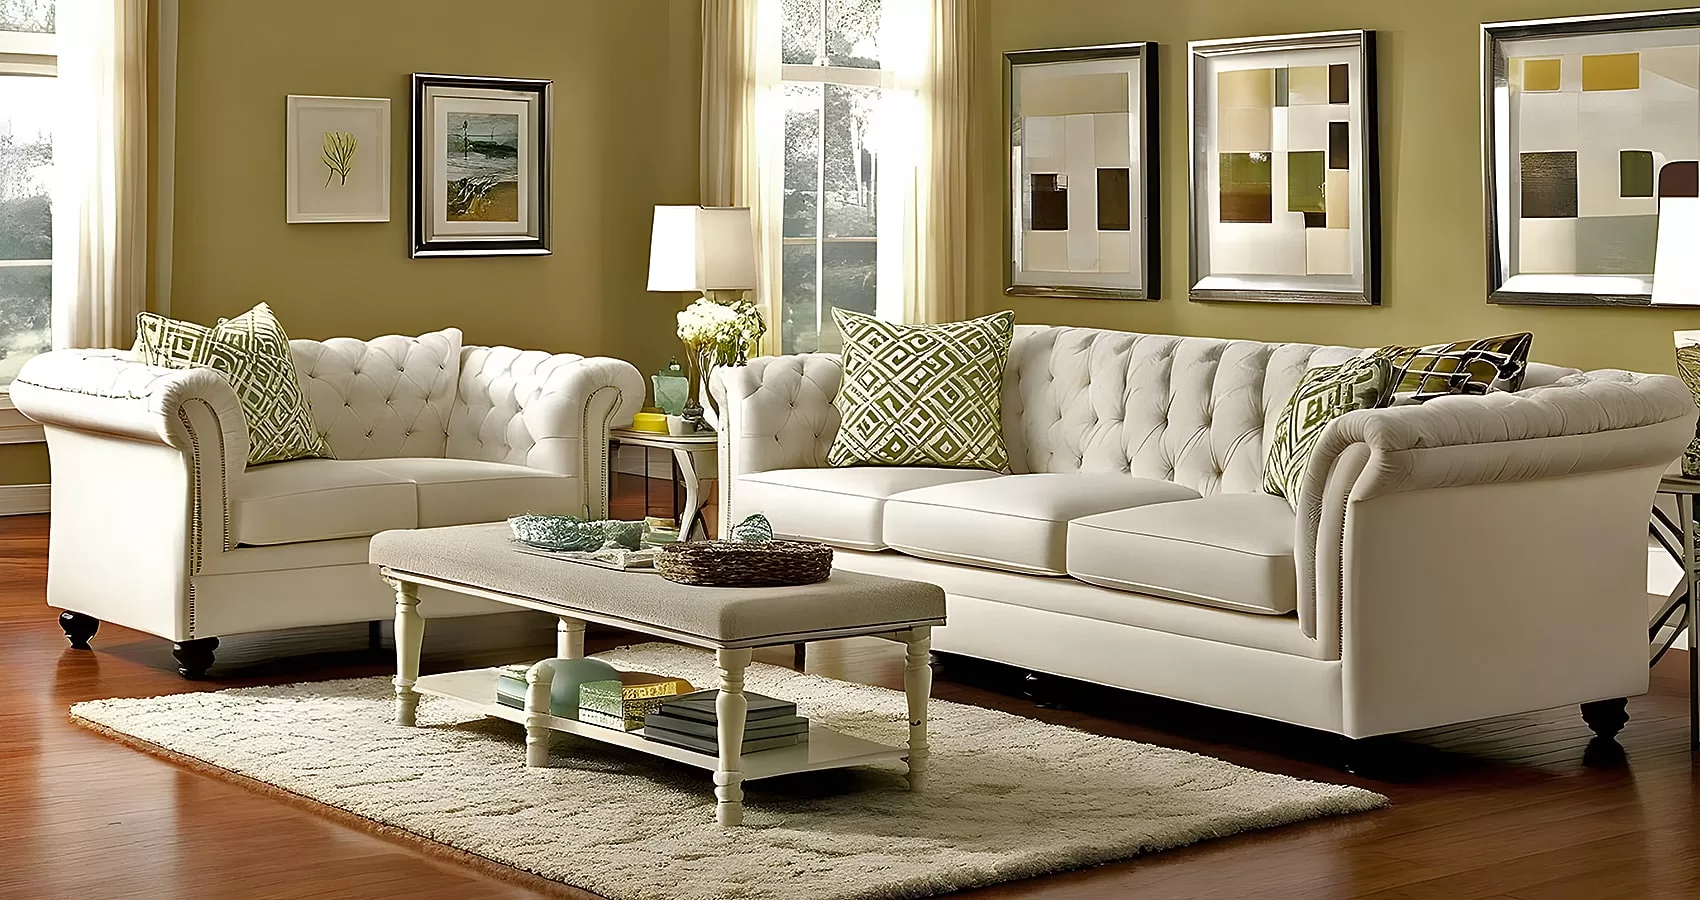 White Sofa Living Room Ideas | White Couch Living Room | White Couch Living Room Ideas